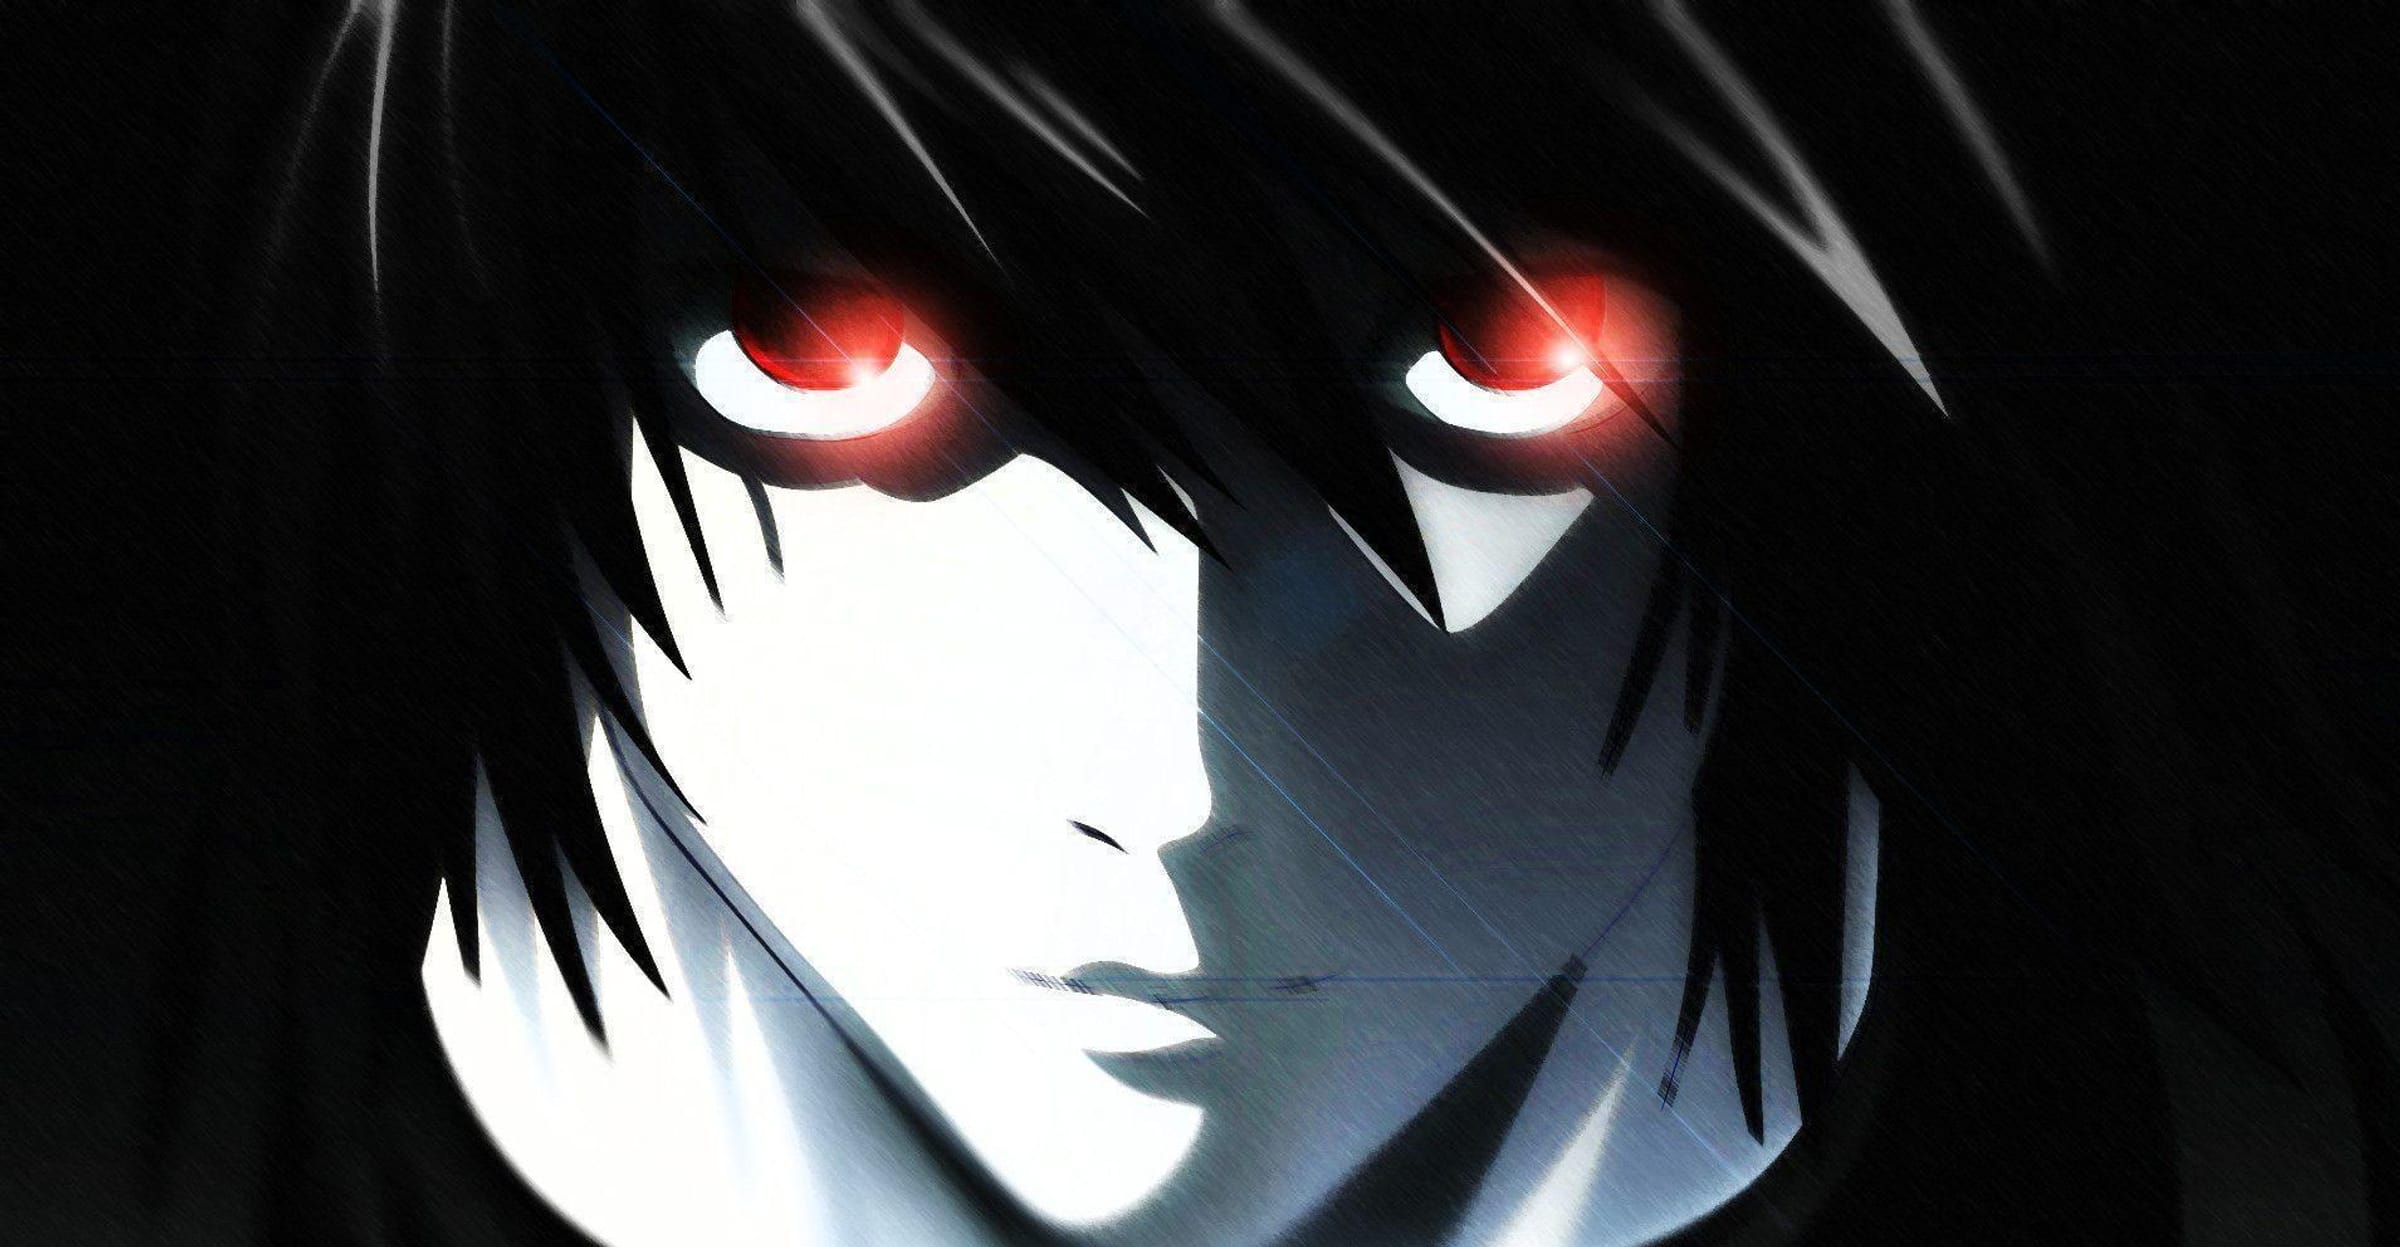 Top 6 Iori Yagami Quotes: Famous Quotes & Sayings About Iori Yagami